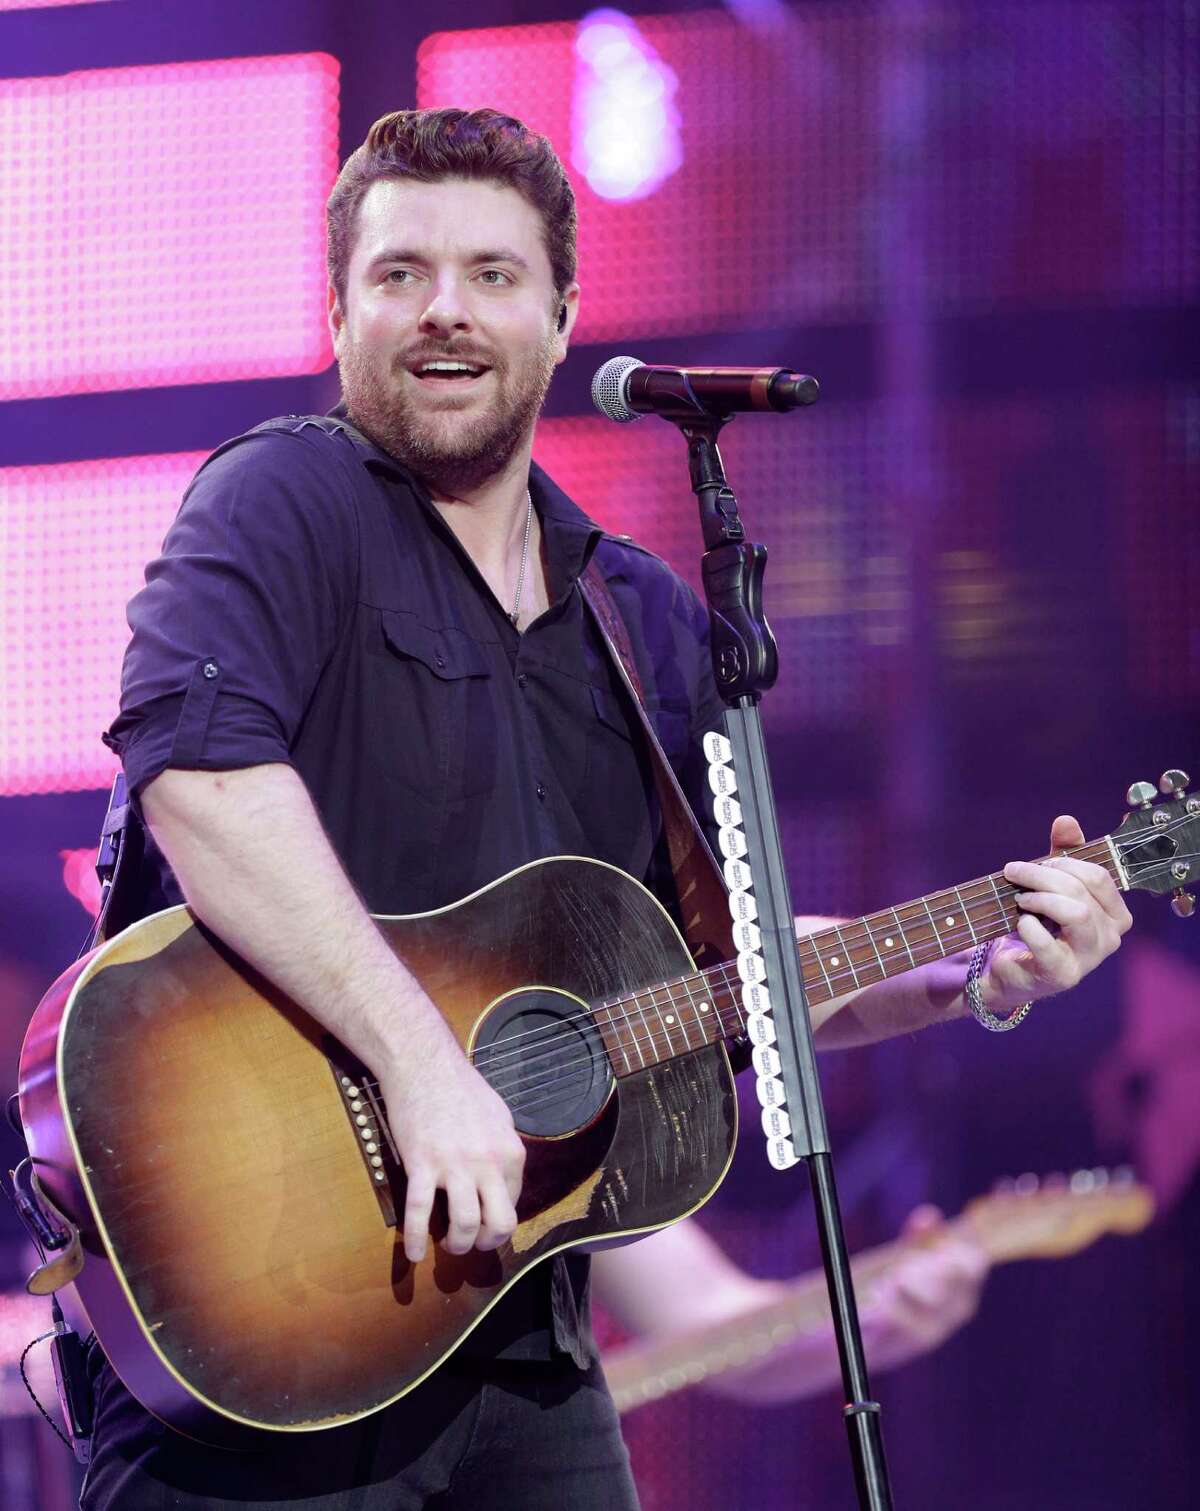 Chris Young in fine voice at RodeoHouston